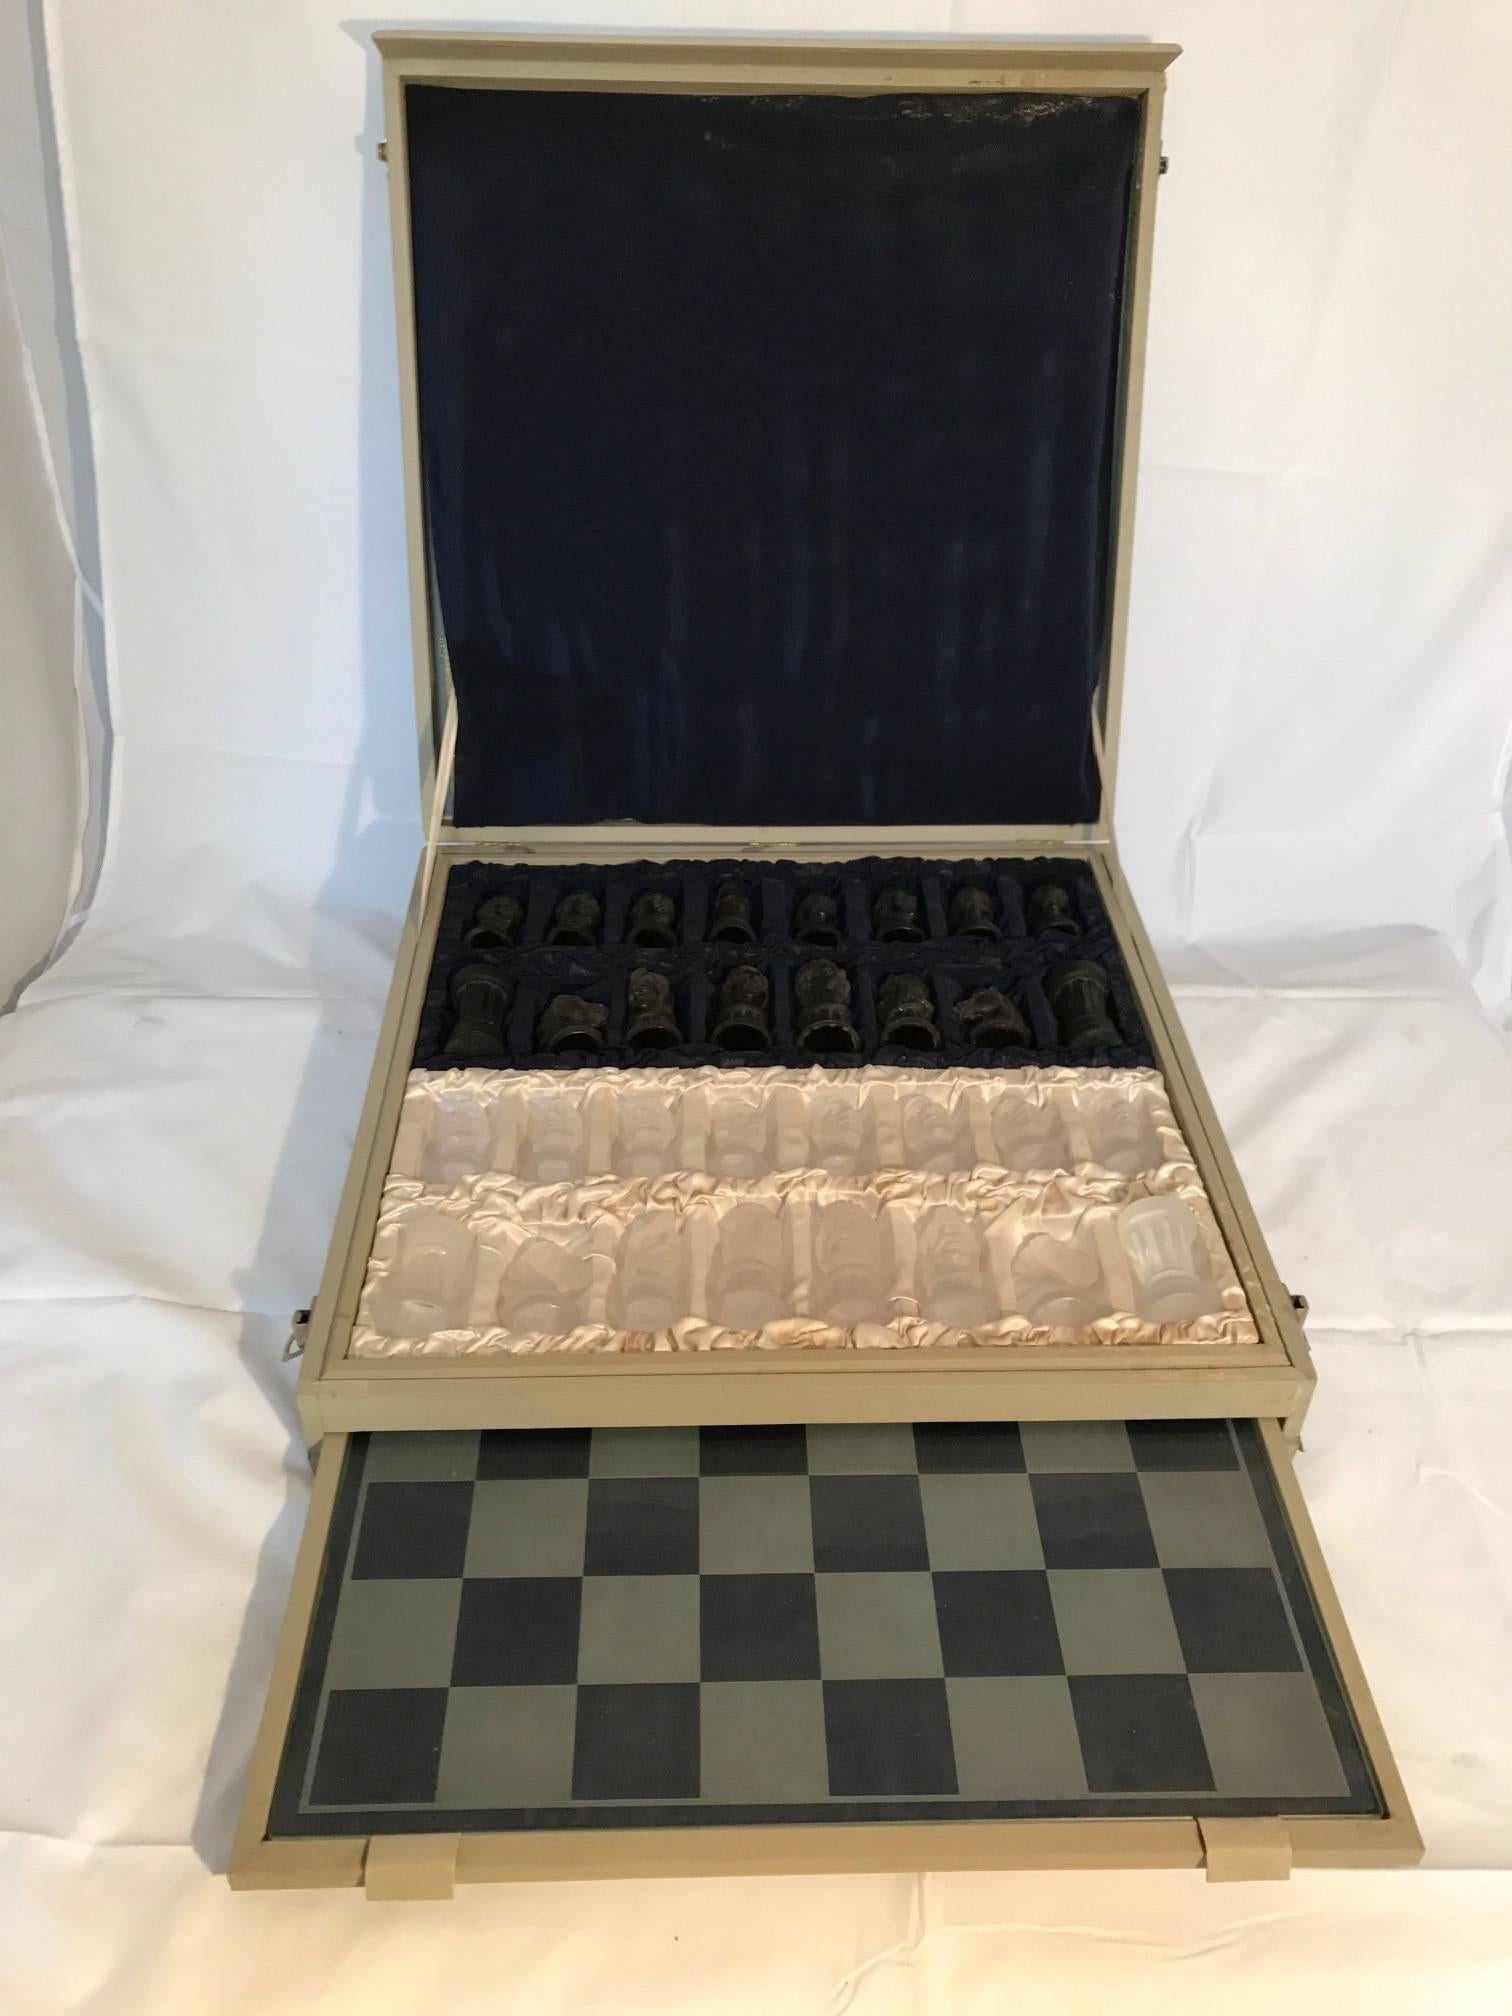 This vintage game of chess has glass board which is placed inside original box and have label 